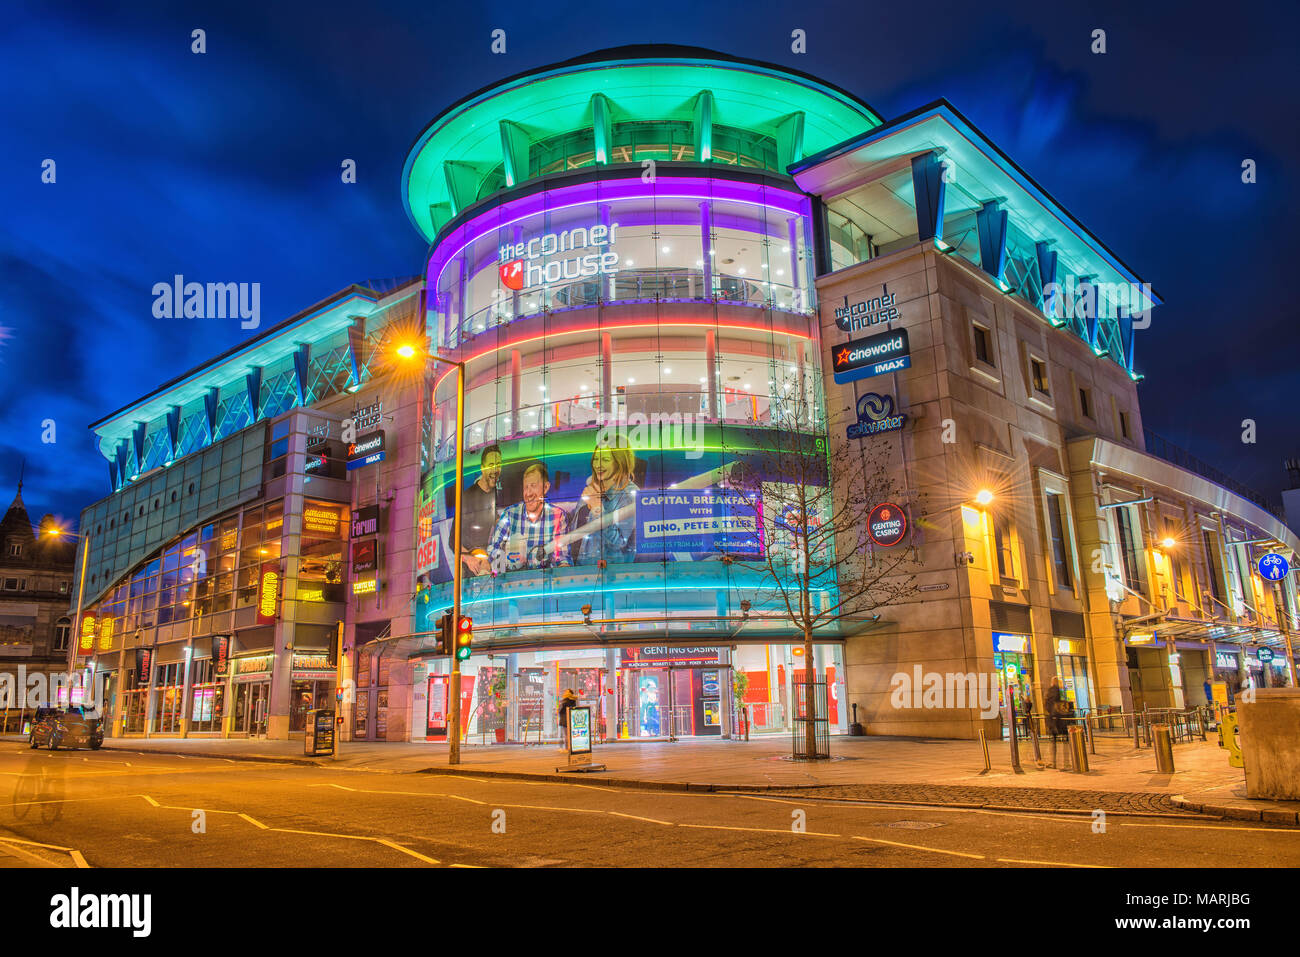 Nottingham, England - April 04, 2018: The Cornerhouse has a great variety of popular drinking and dining options, based in the heart of Nottingham Stock Photo